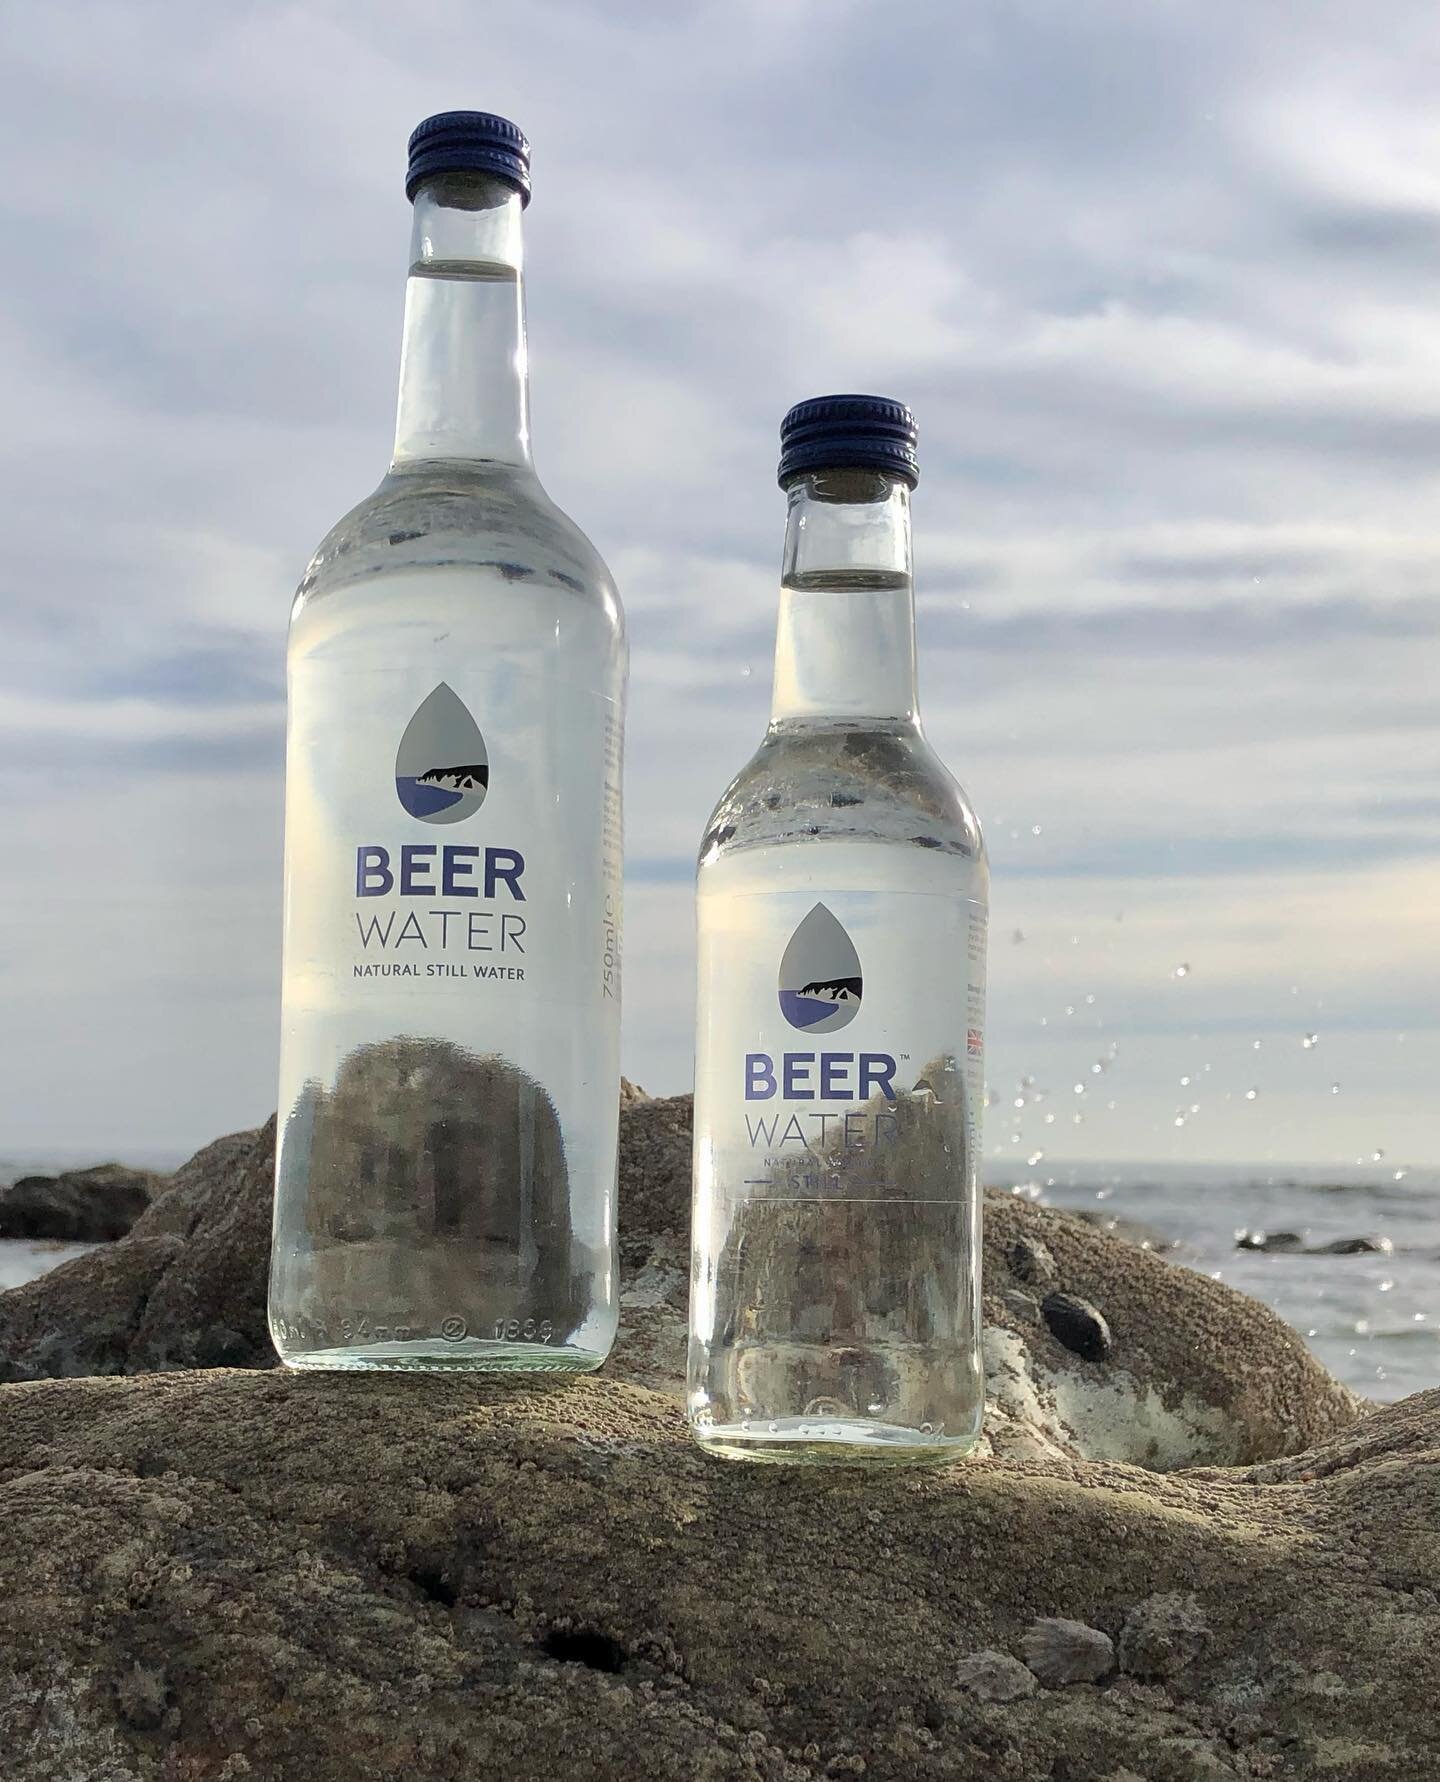 Refreshing @_beerwater sourced from the hills of the quaint village of Beer, which is located along the beautiful Jurassic coastline in Devon.💧

#devon #bottledwater #bottledwaterbrands #mineralwater #beerwater #britishcoastline #jurassiccoastline #